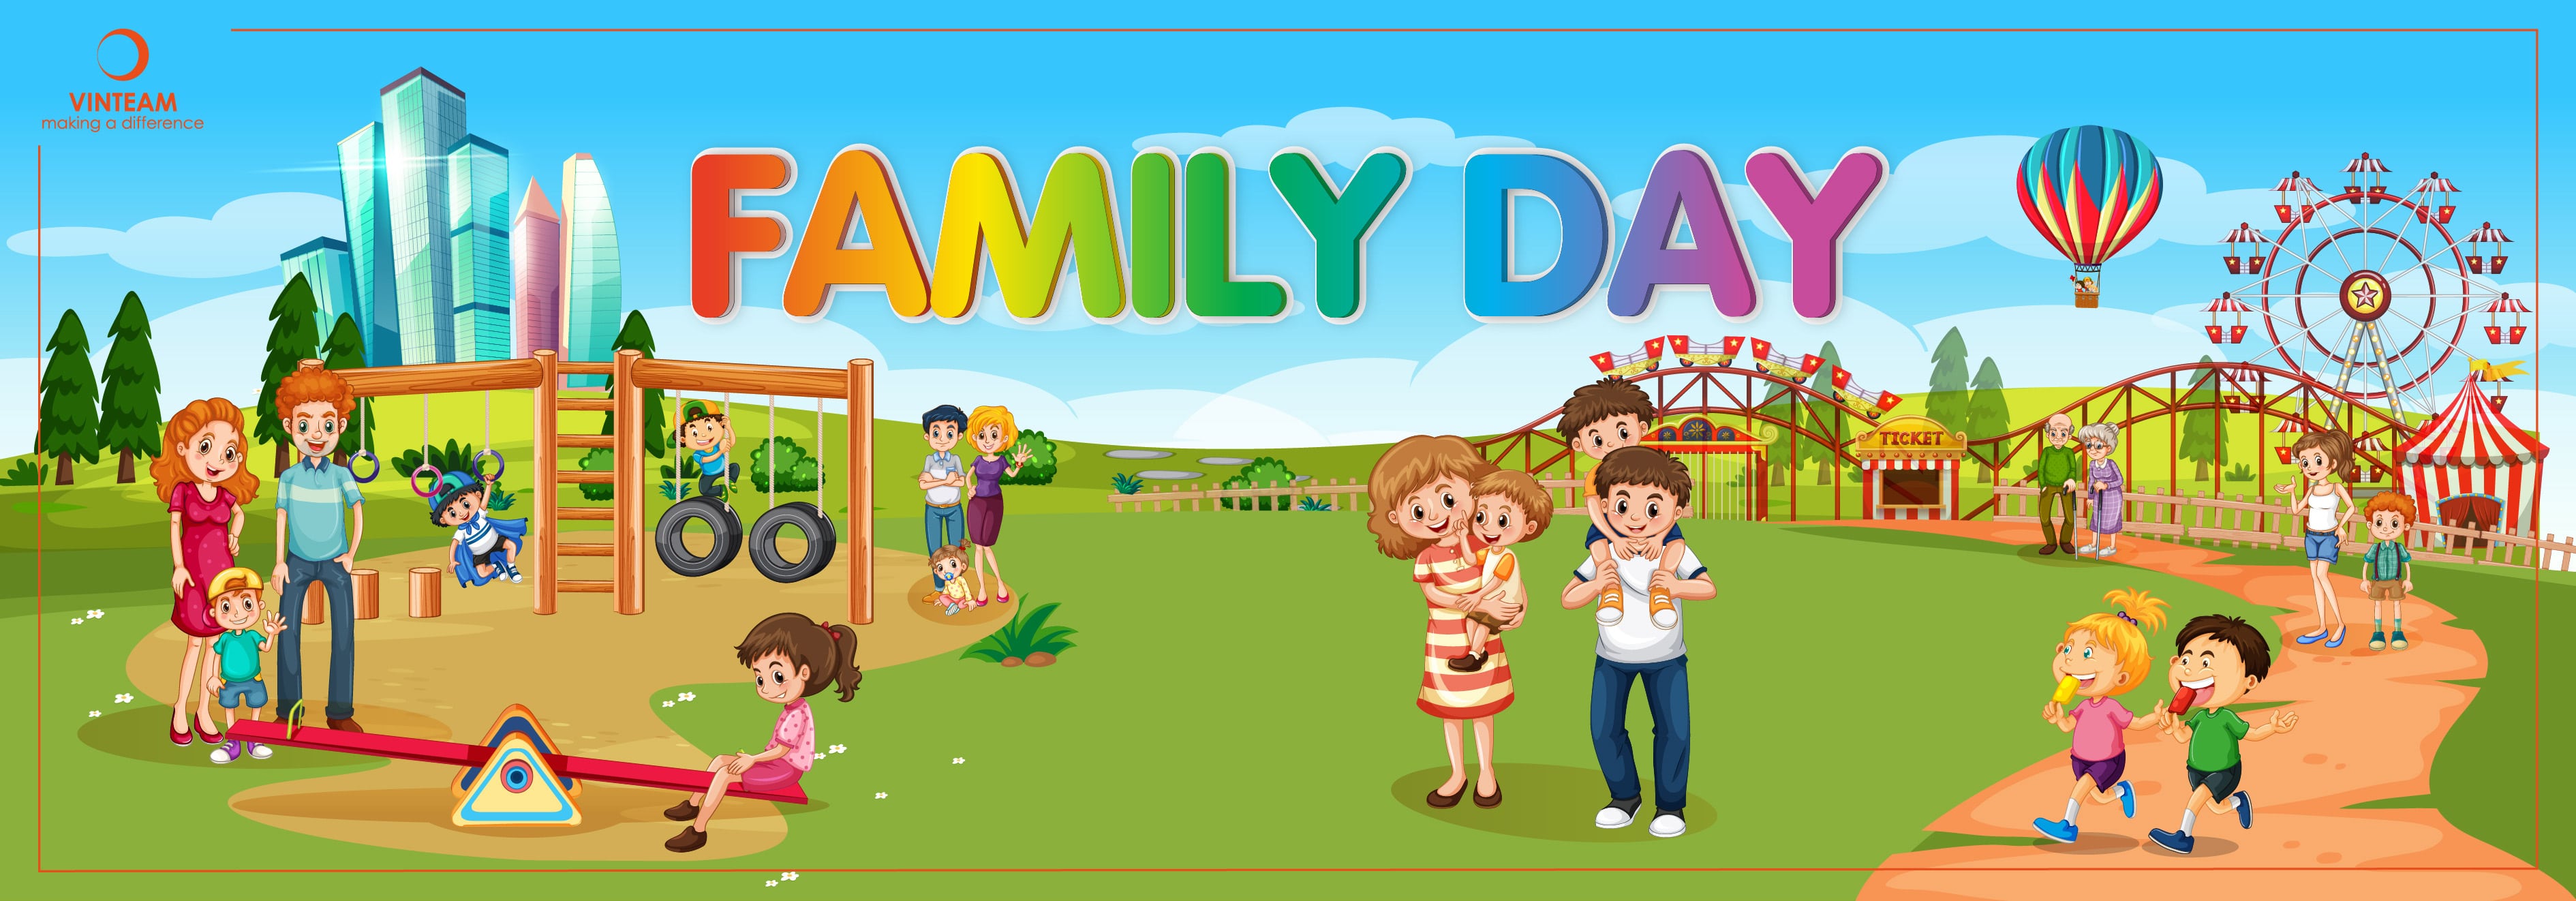 18-COVER-FAMILY-DAY-01-min